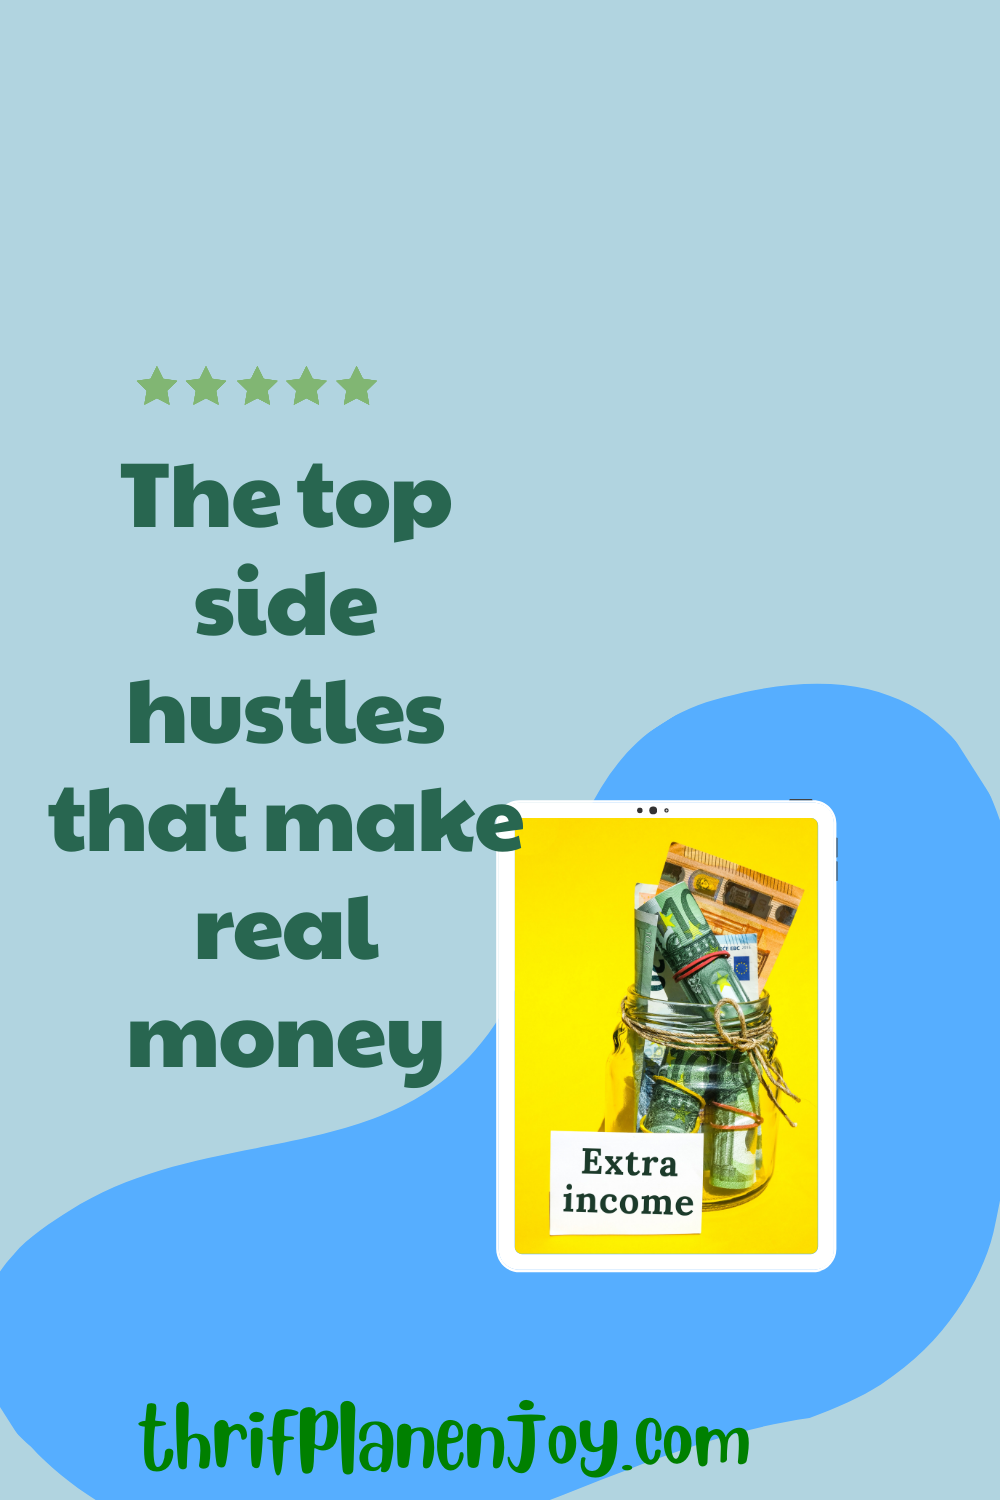 The top side hustles that make real money